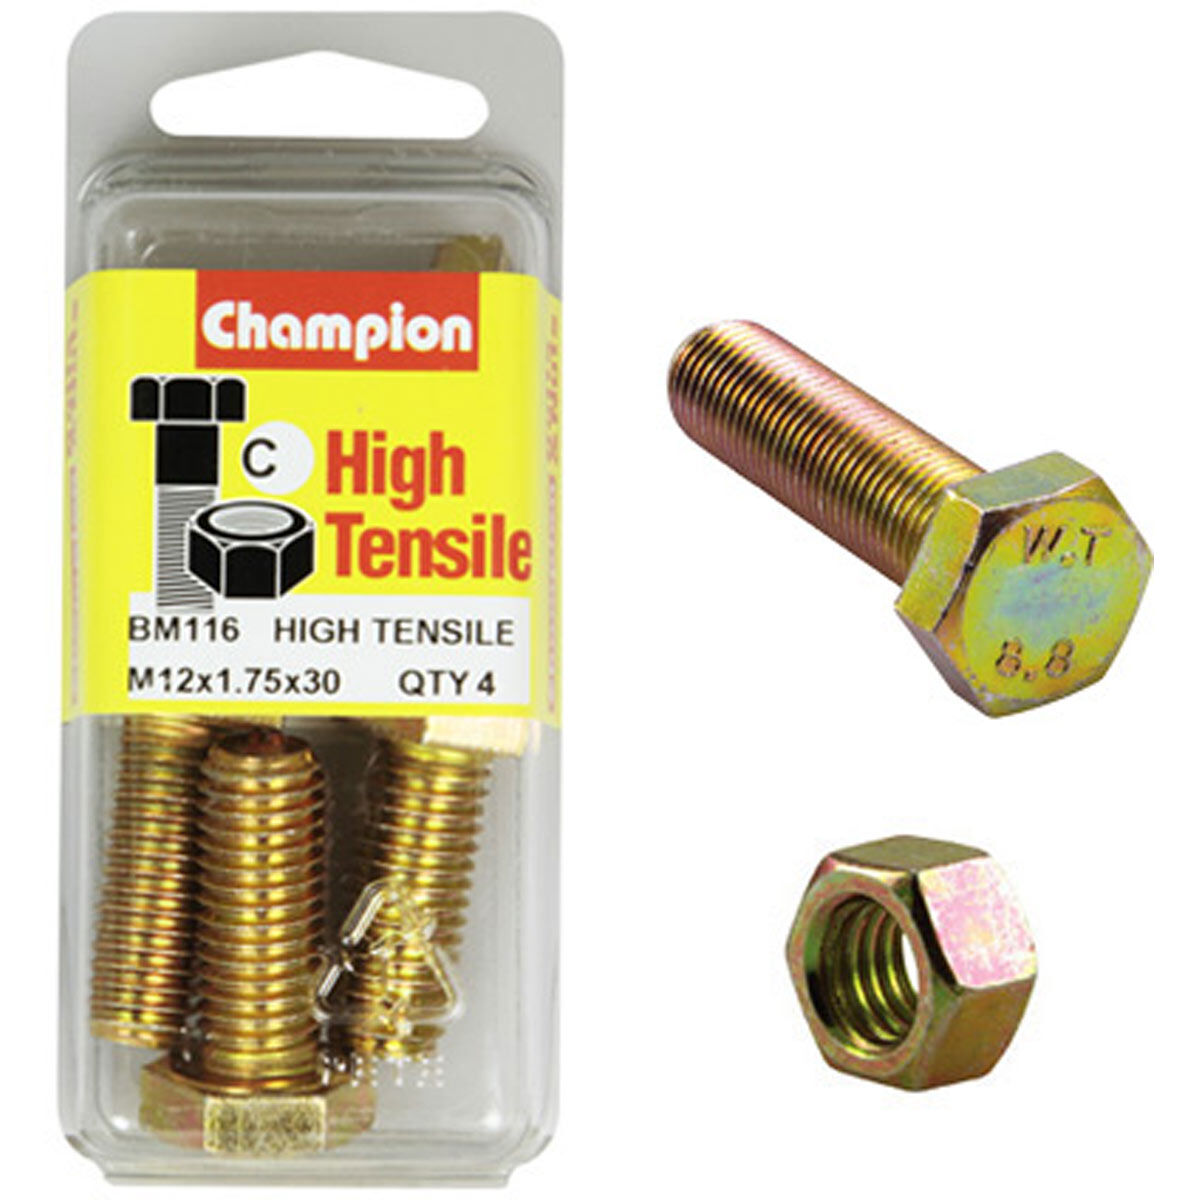 AUSTRALIA BRAND Details about   Pinnacle Hi Tensile Hex Bolt and Nut Packs 